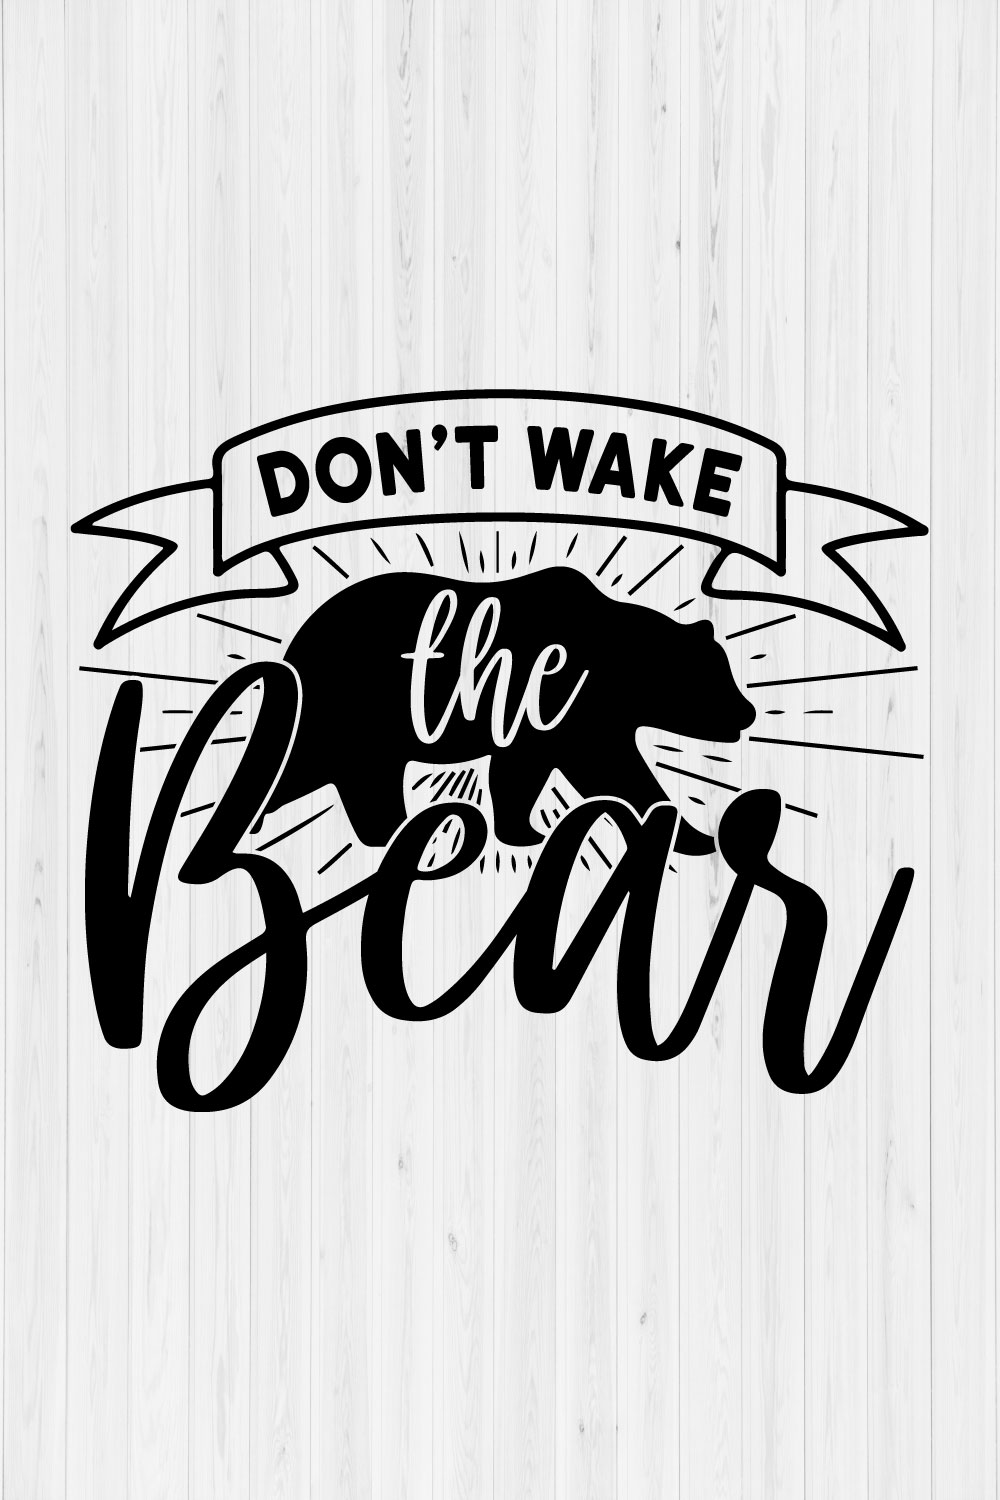 Don't wake the bear pinterest preview image.